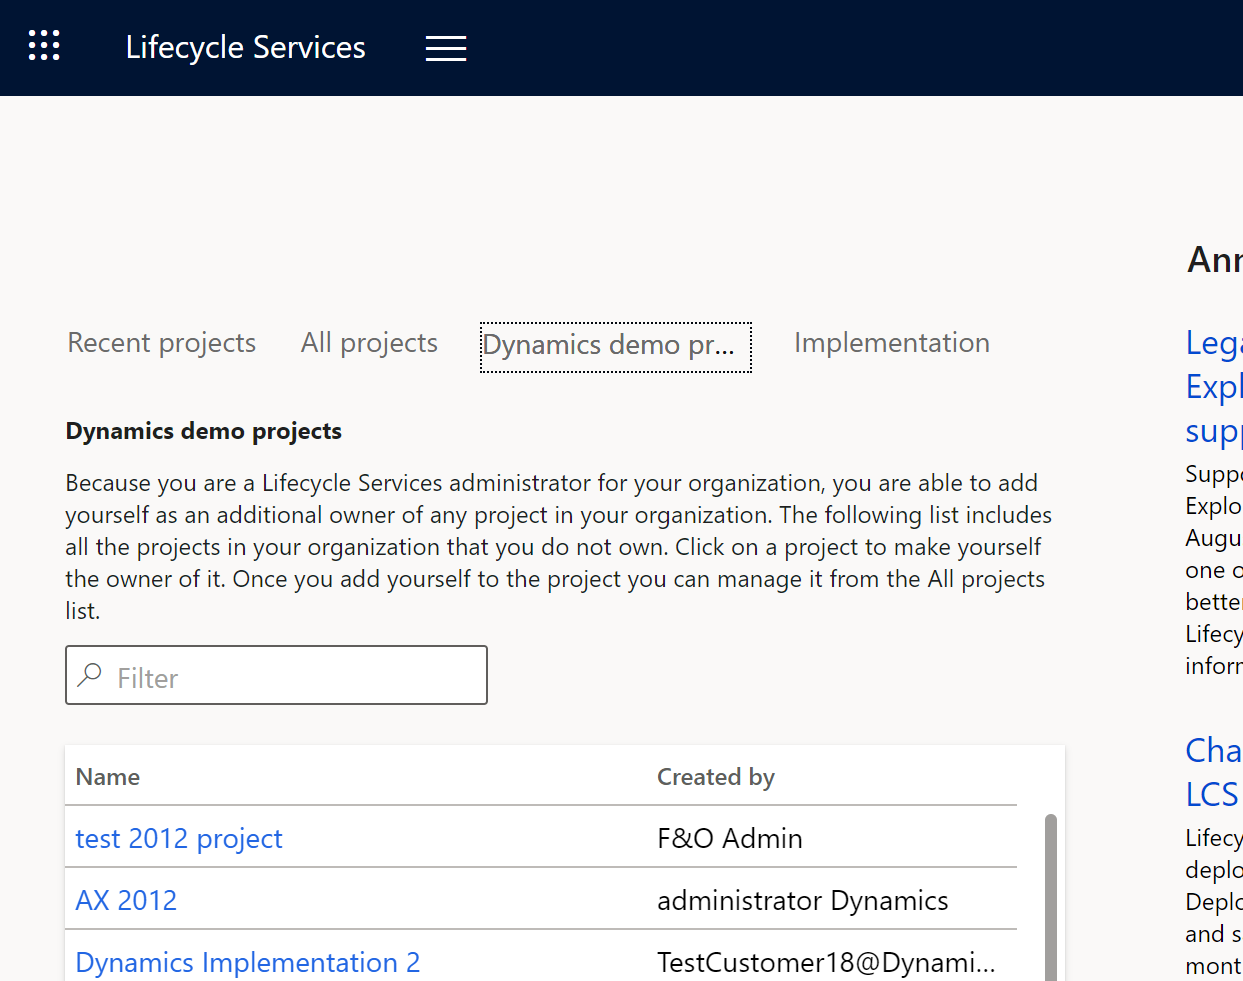 Message in LCS that states that organization admins can add themselves to any project.